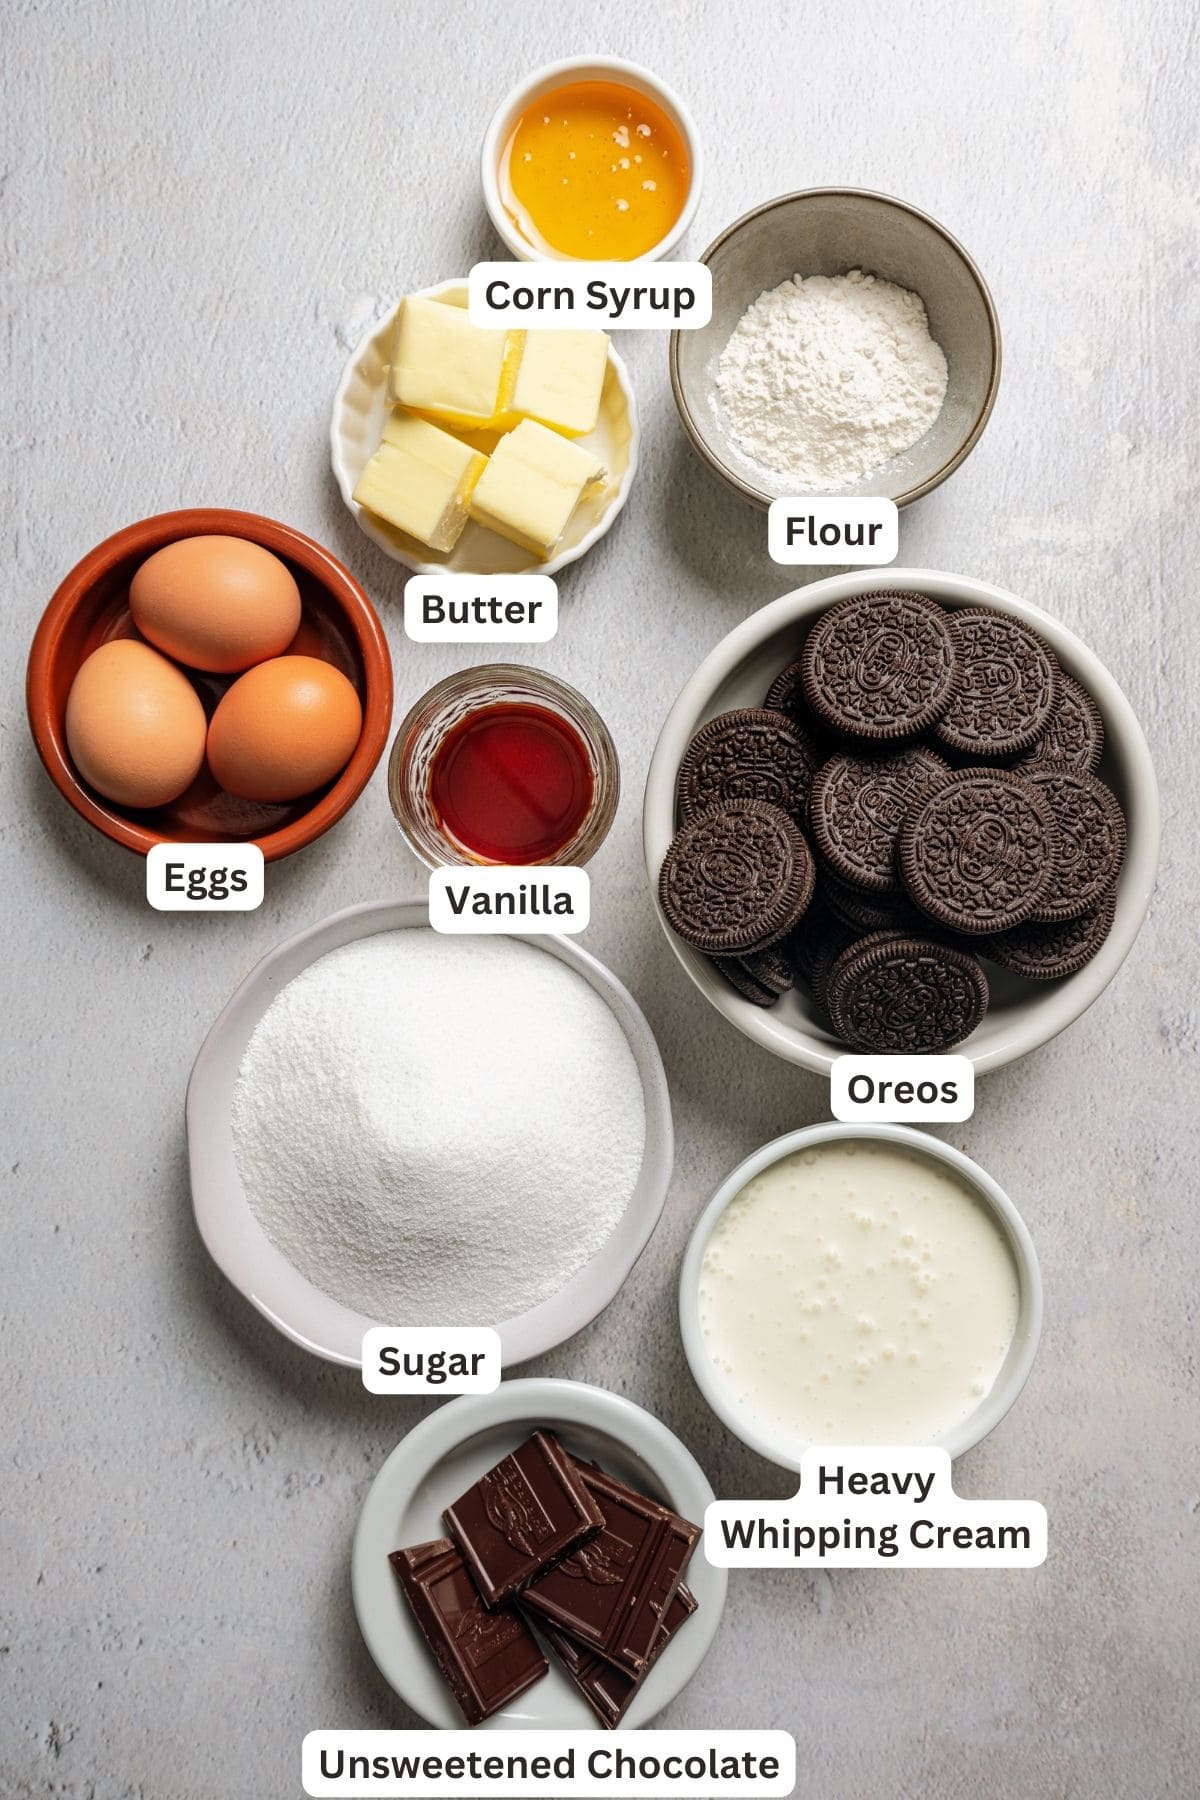 Ingredients for Mississippi mud pie with text labels overlaying each ingredient.